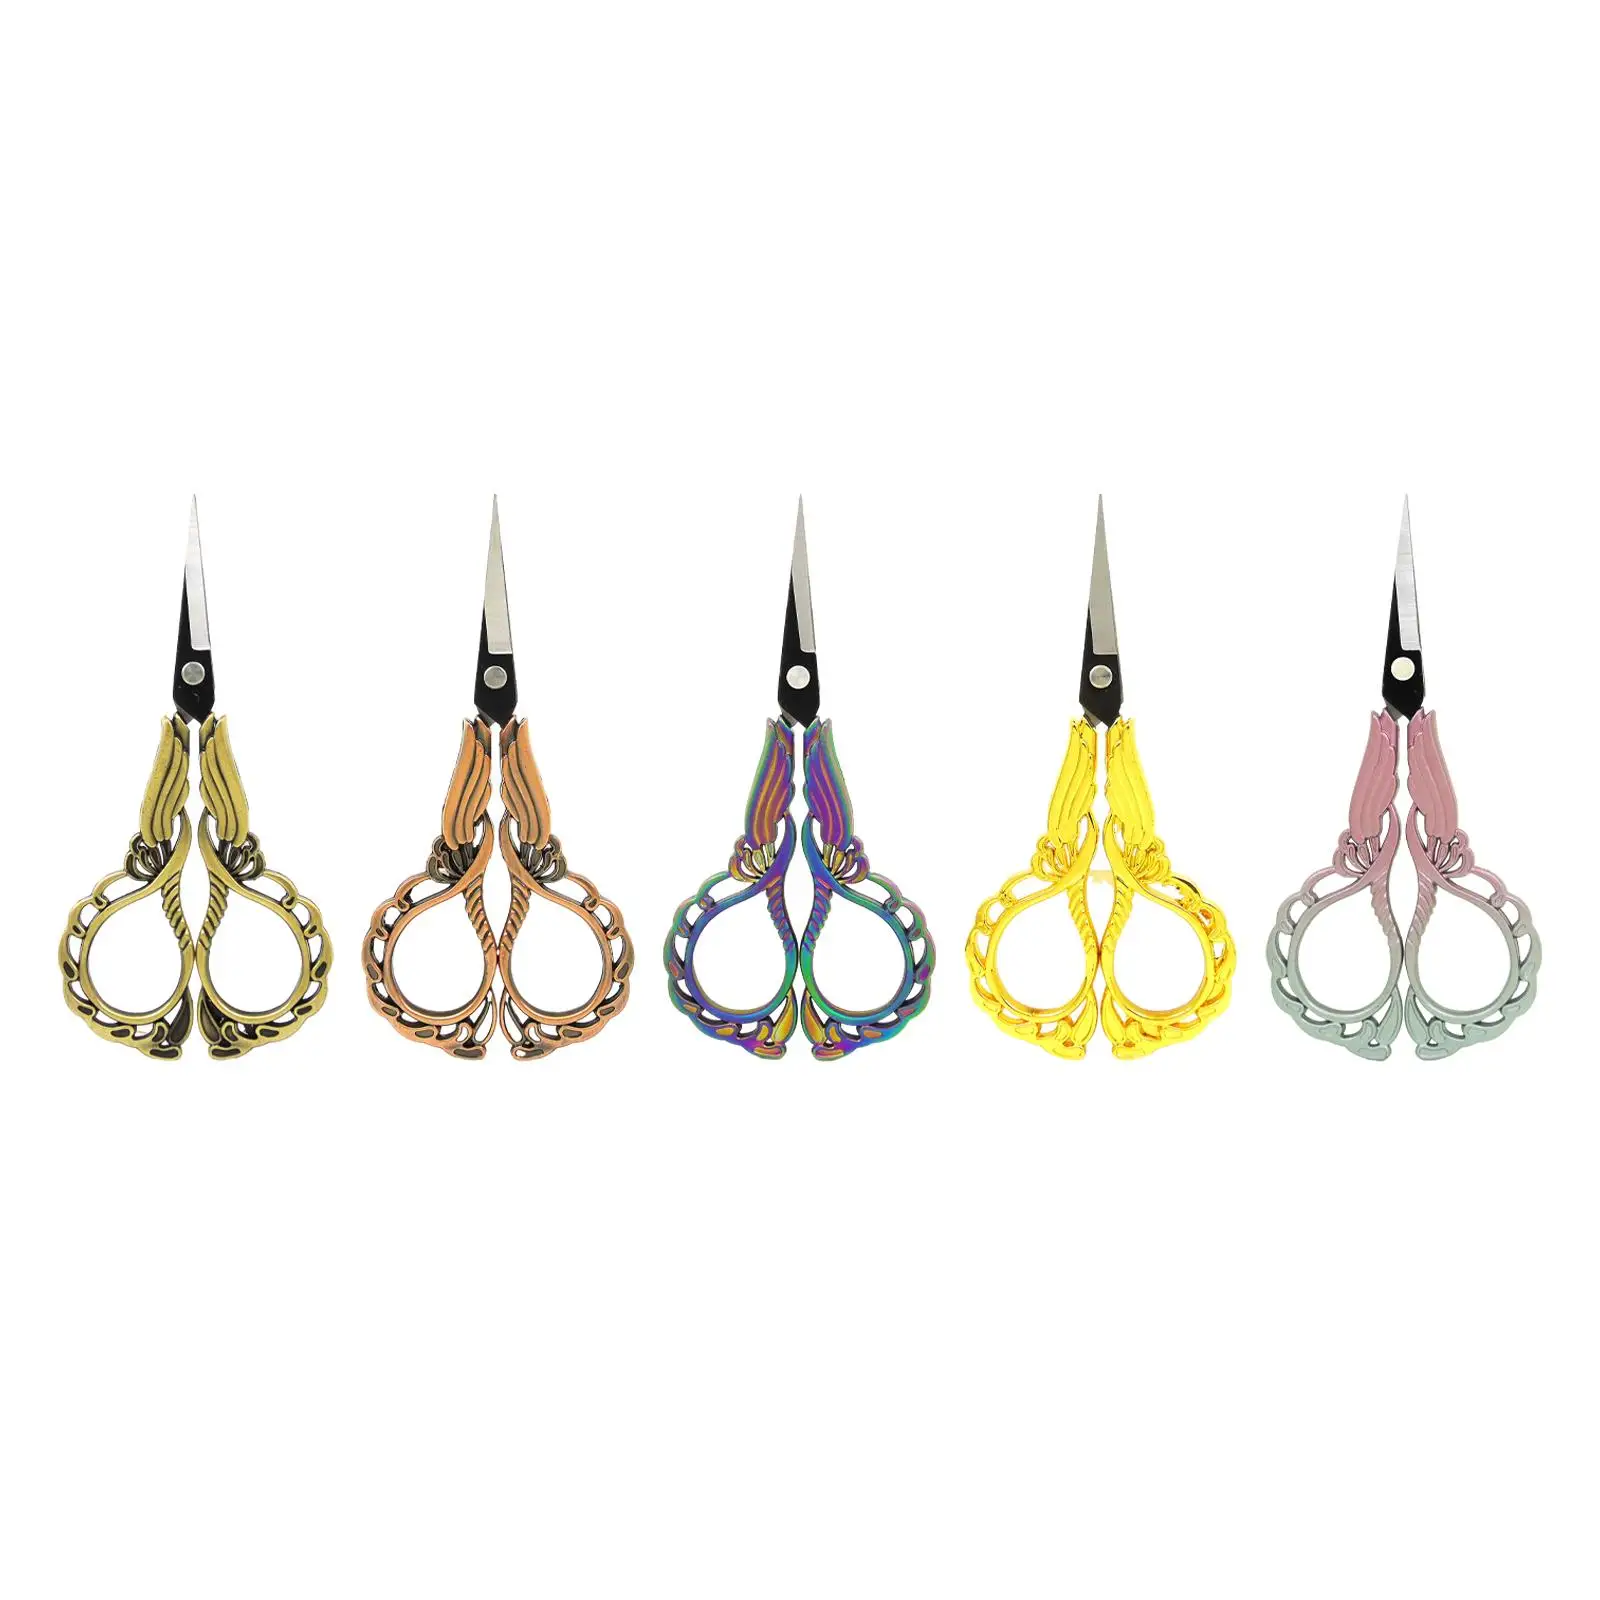 Embroidery Scissors Portable Vintage Style Cutting Sewing for Thread Household Needlework DIY Fabric Sewing Accessories